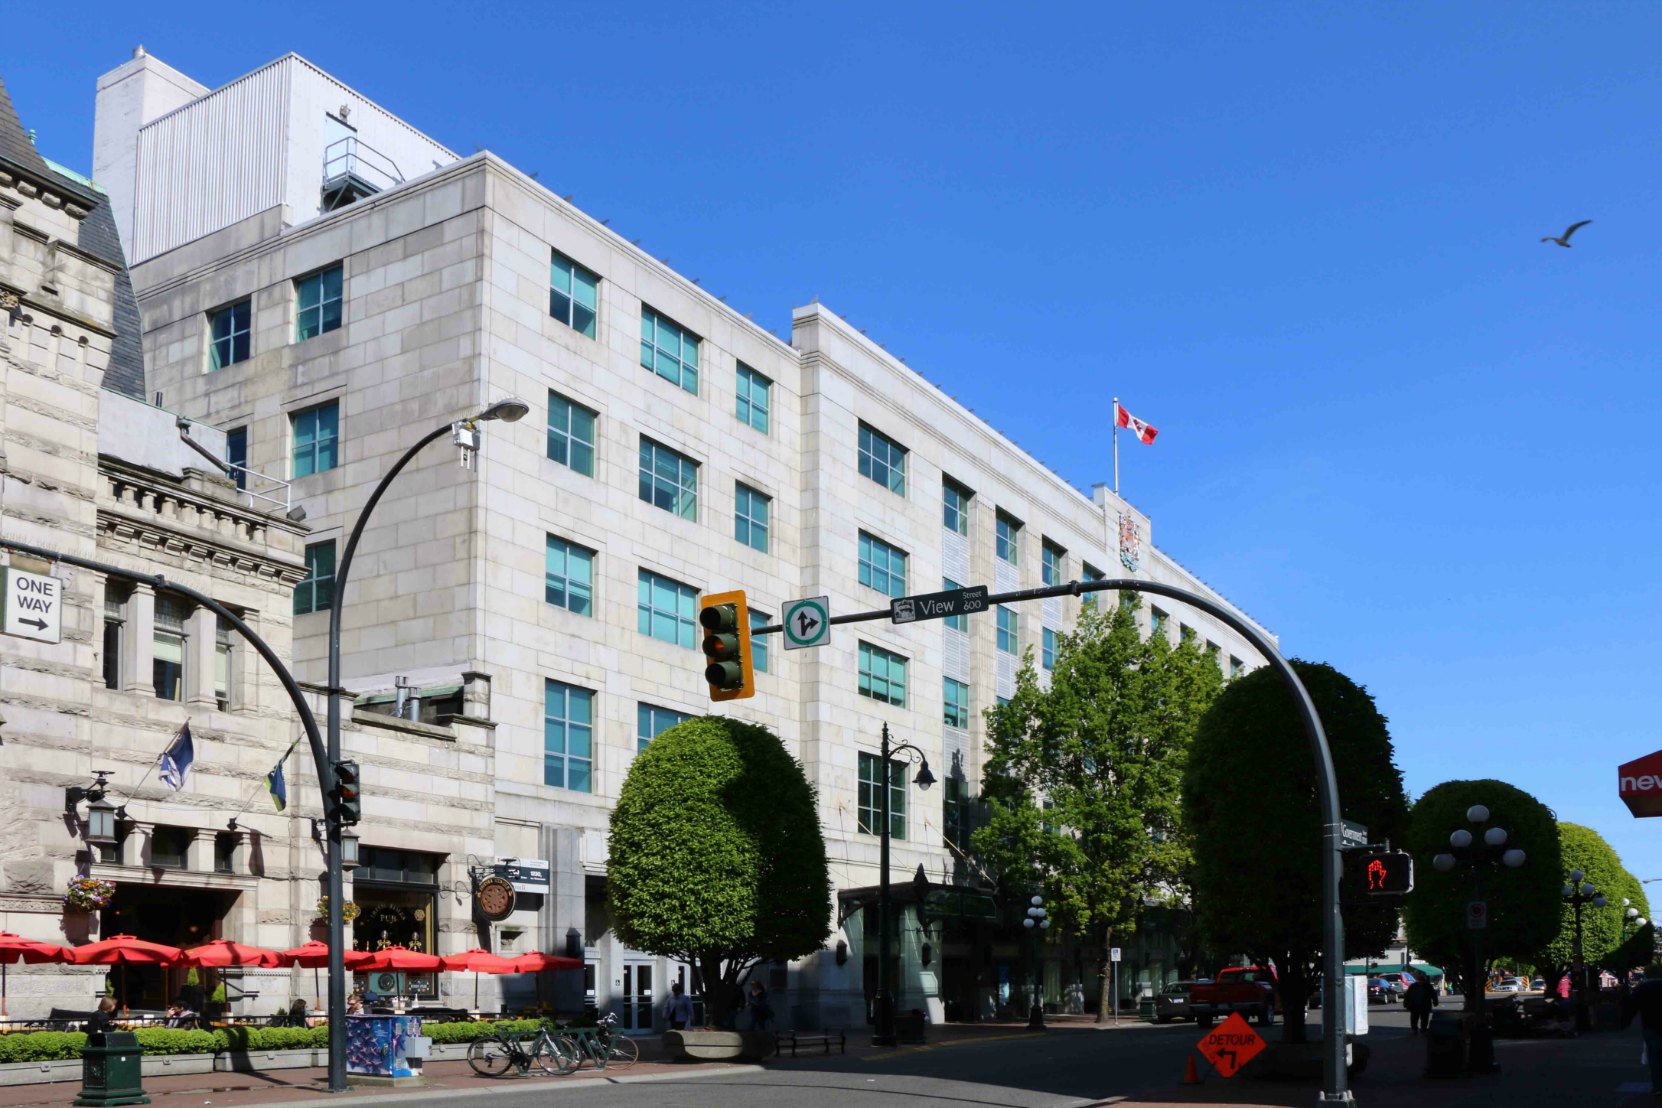 The Federal Building, 1230 Government Street, built in 1948-1952 by architects Percy Leonard James and Douglas James for the Government of Canada. (photo by Victoria Online Sightseeing Tours)